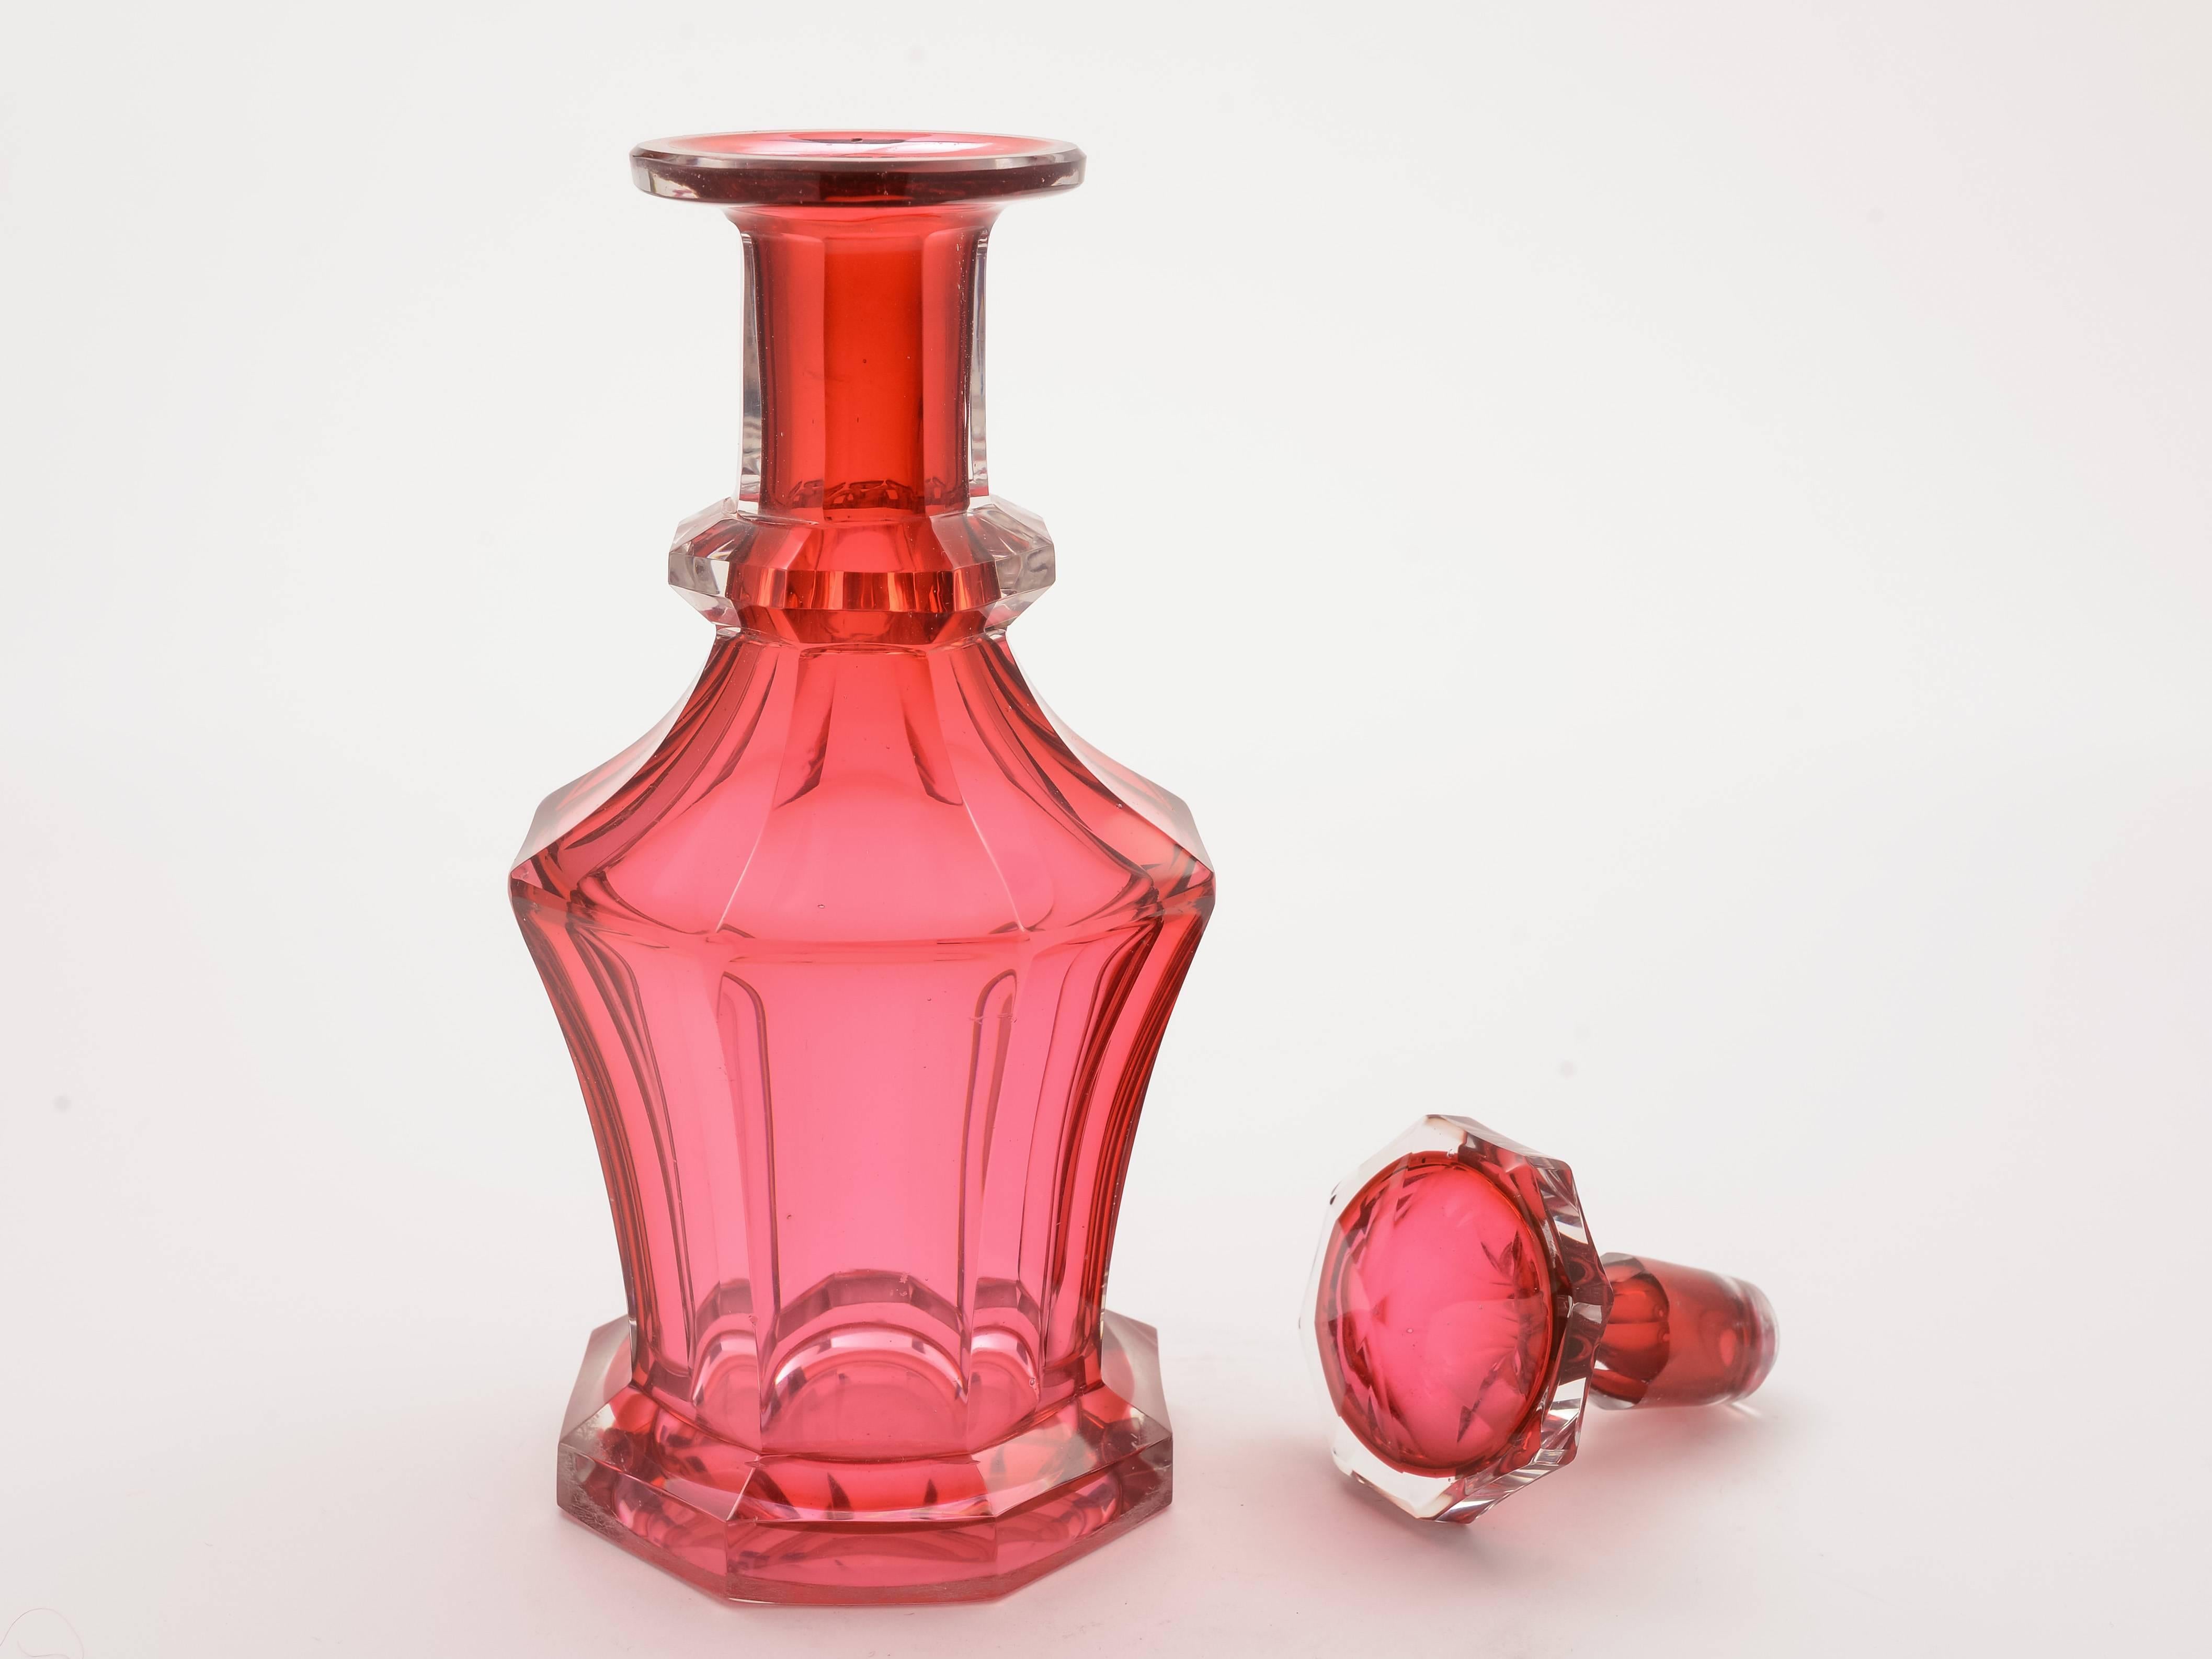 A stunning and rare, early Victorian English cranberry glass decanter in eight-sided panel cut design and with original stopper, circa 1840.

Measurements: Height 8 inches; (approximate 20cm)
Diameter across base 3 inches; (approximate